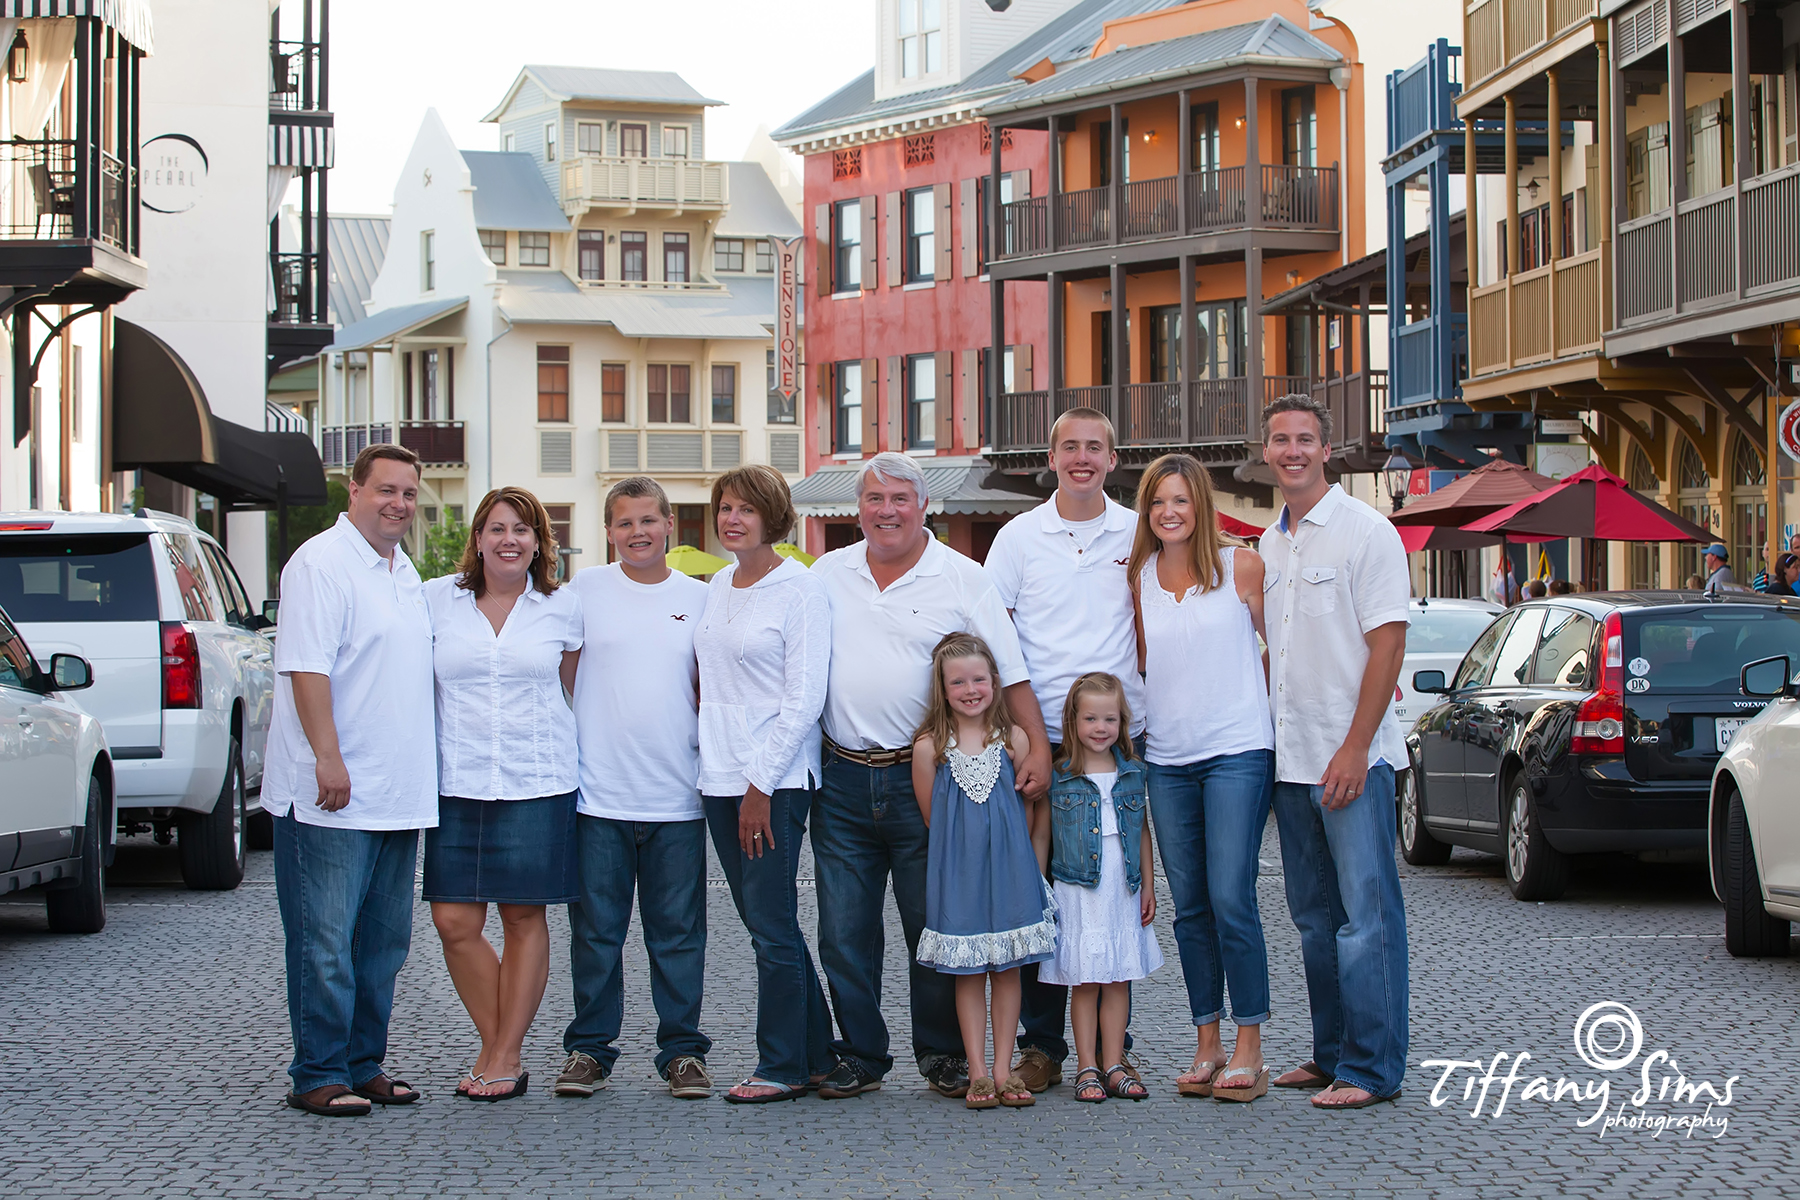 Destin Photography by Tiffany Sims Photography #destin #destinphotography #destinbeachphotography #30aphotography #30abeachphotography #destinphotographer #30aphotographer #fortwaltonbeachphotography #okaloosaislandphotography | KH17rw